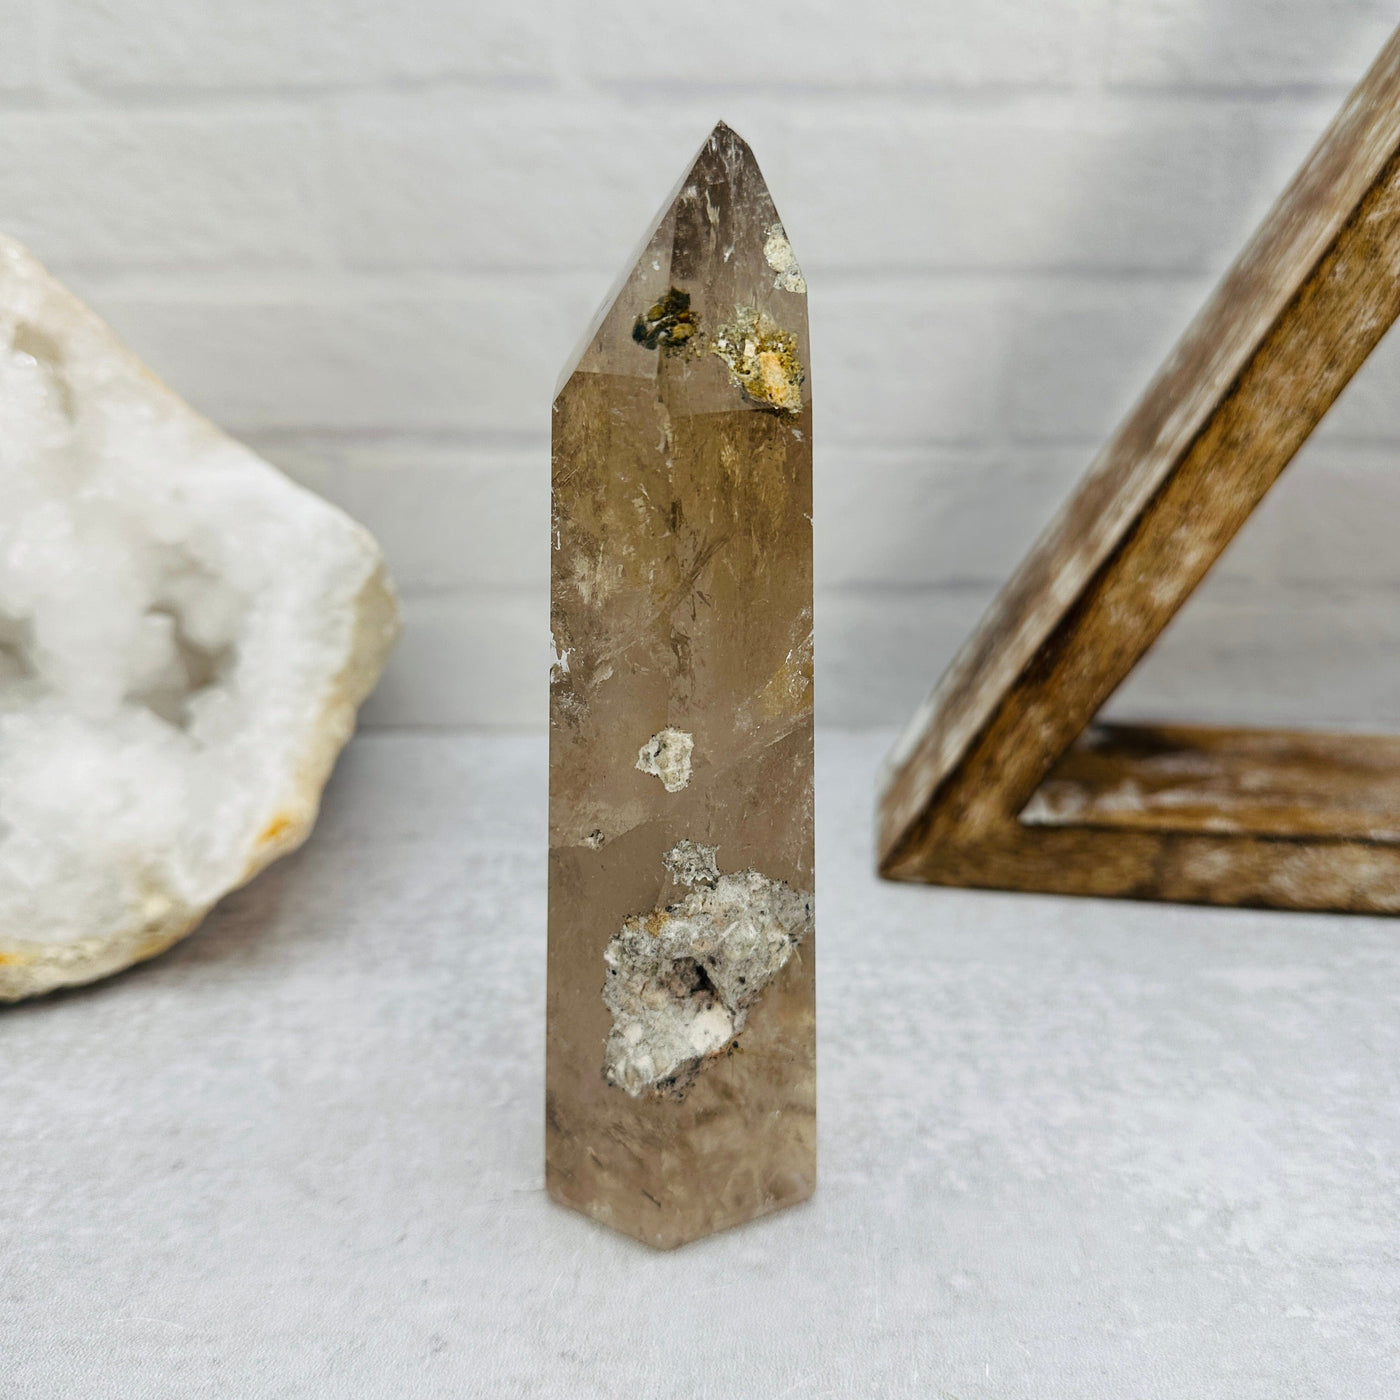  Polished Lodalite Points with Natural Inclusions - OOAK - side